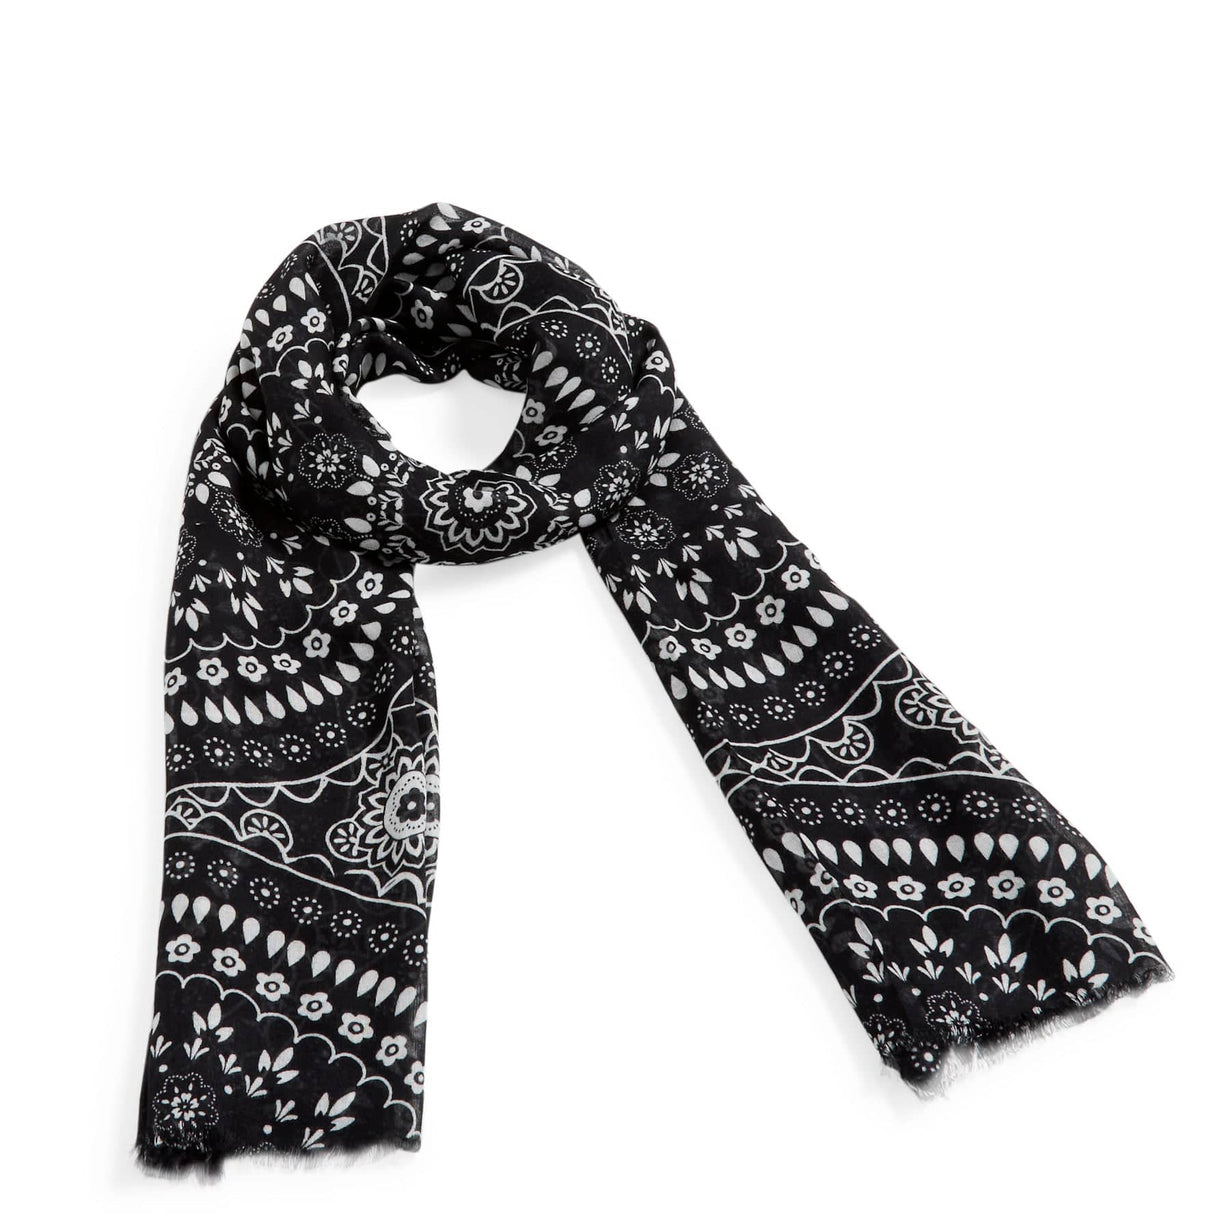 Vera Bradley - Soft Fringe Scarf in Stitched Flowers:   Midtown Hipster in Midtown Khaki